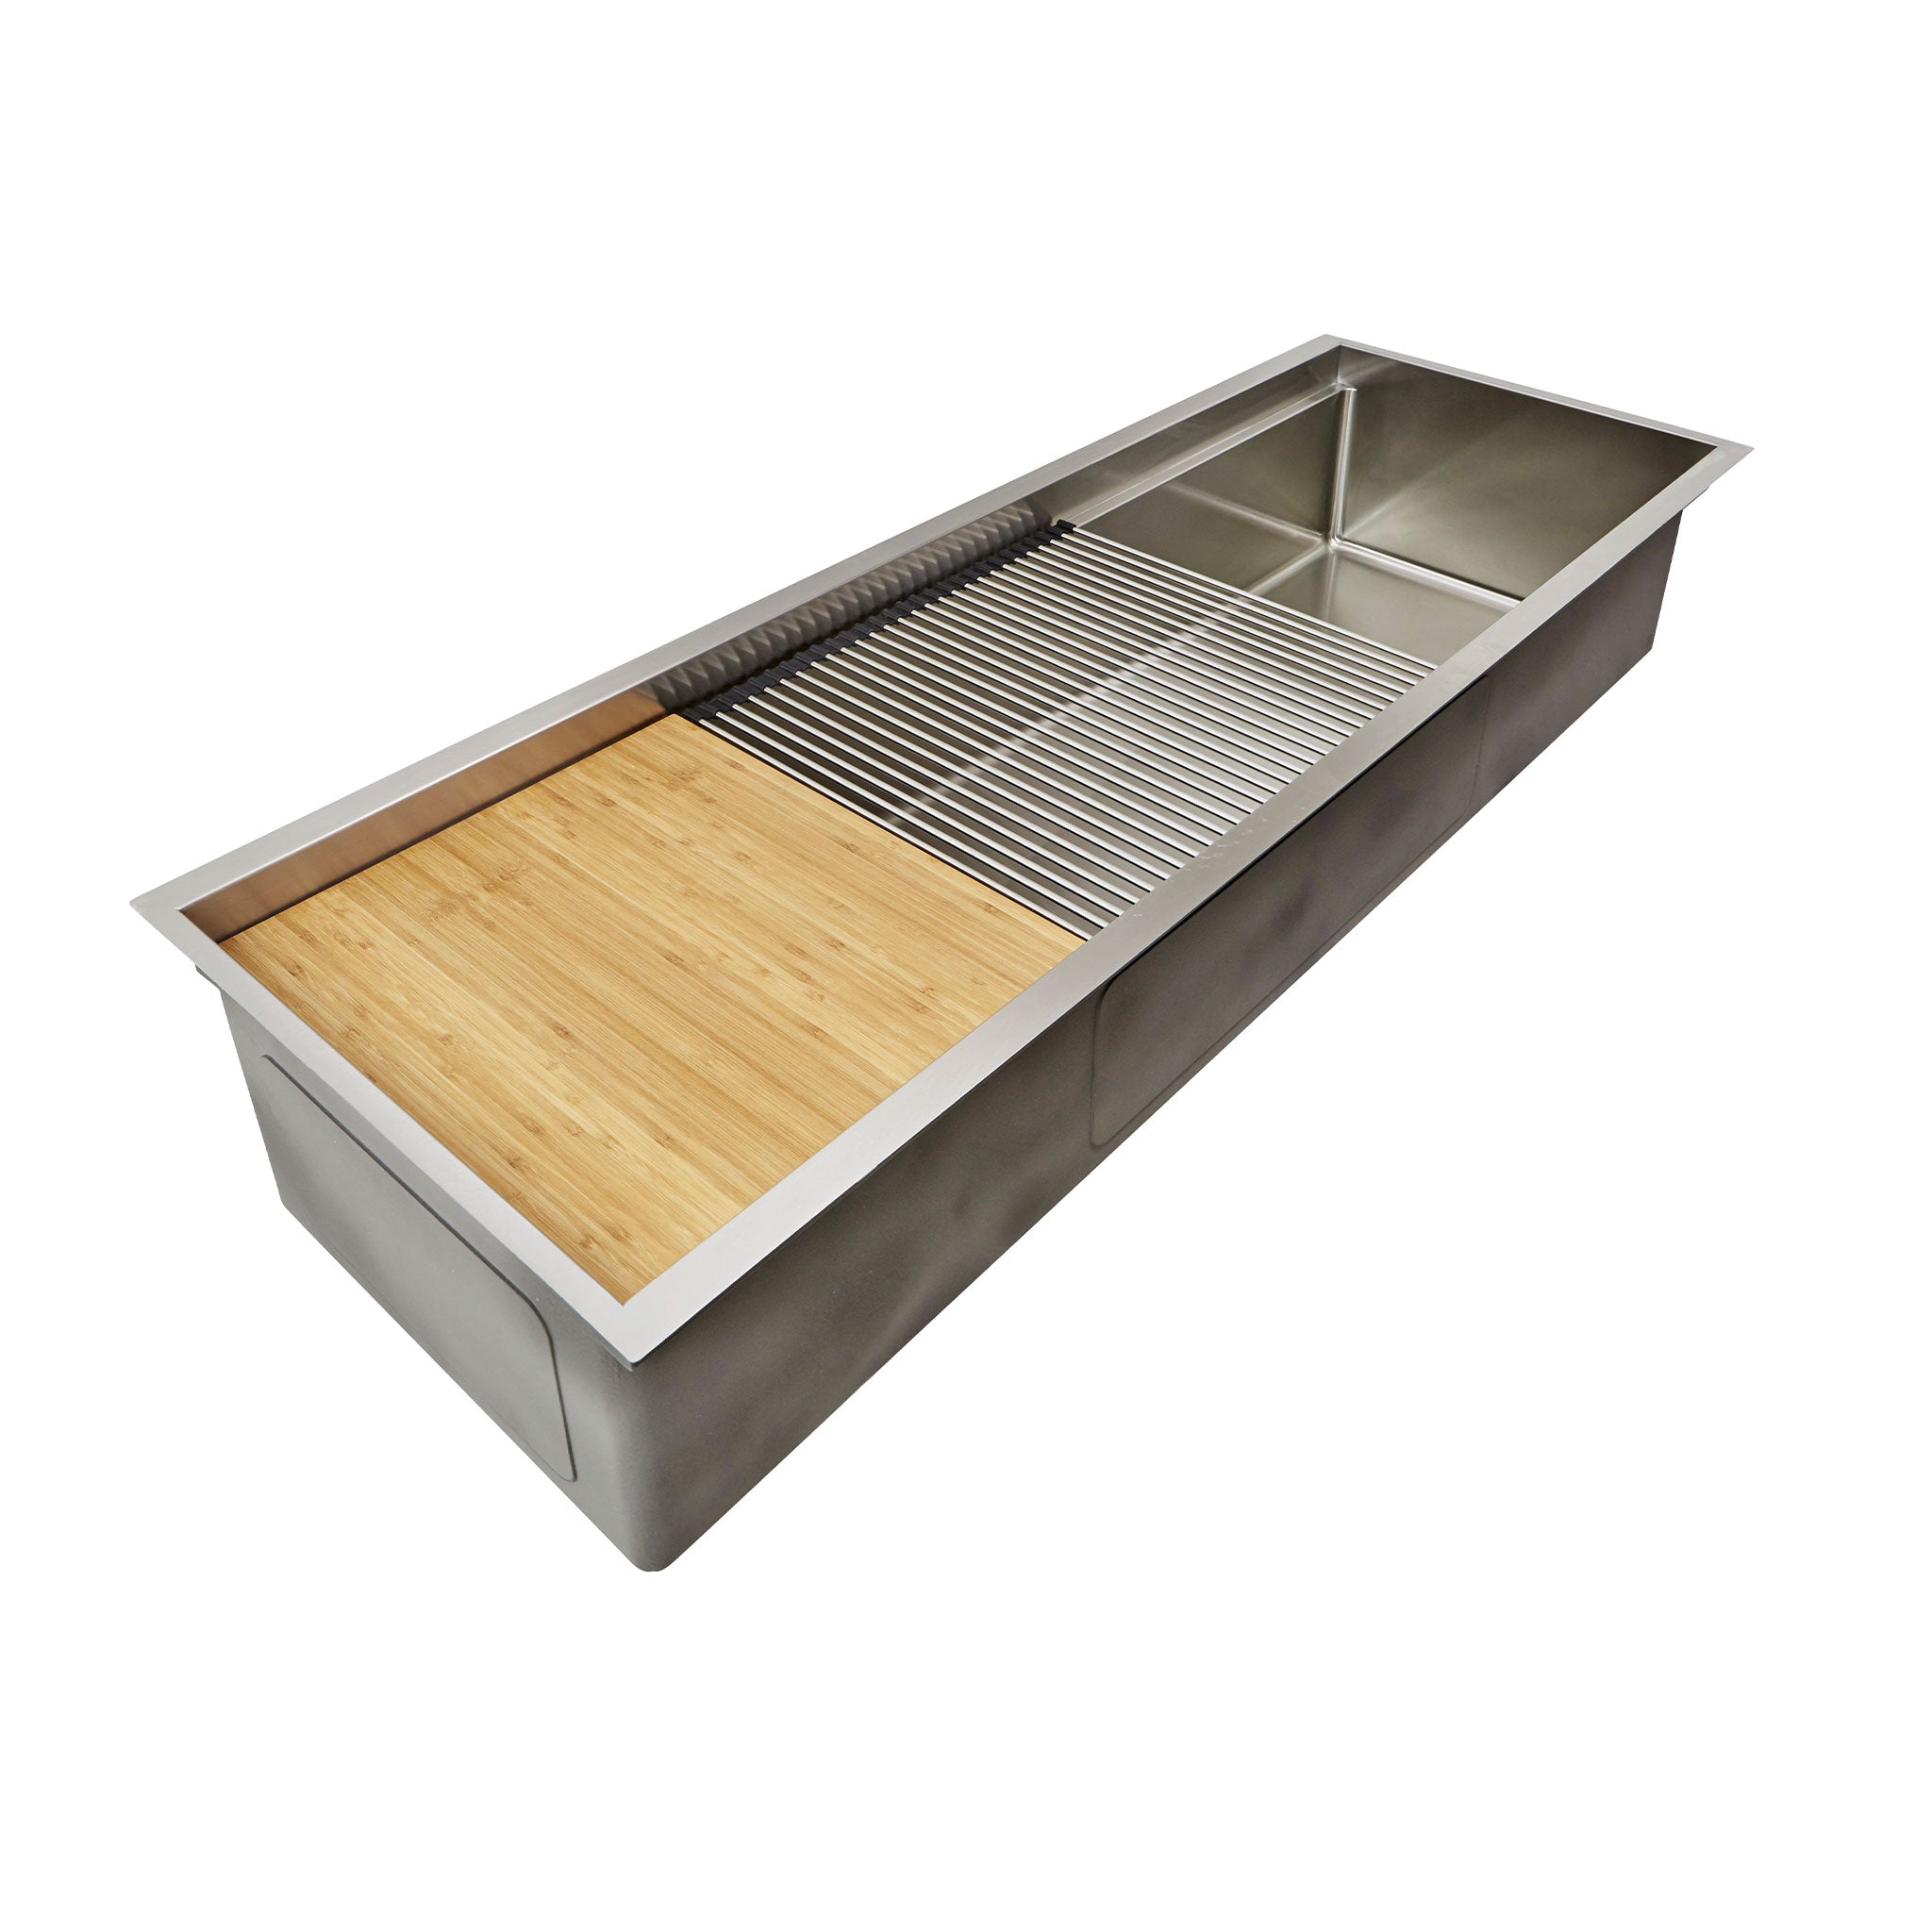 Oversized 56" Workstation Kitchen Sink in Stainless Steel That Can Hold Bamboo Cutting Board and Stainless Steel Rollmat